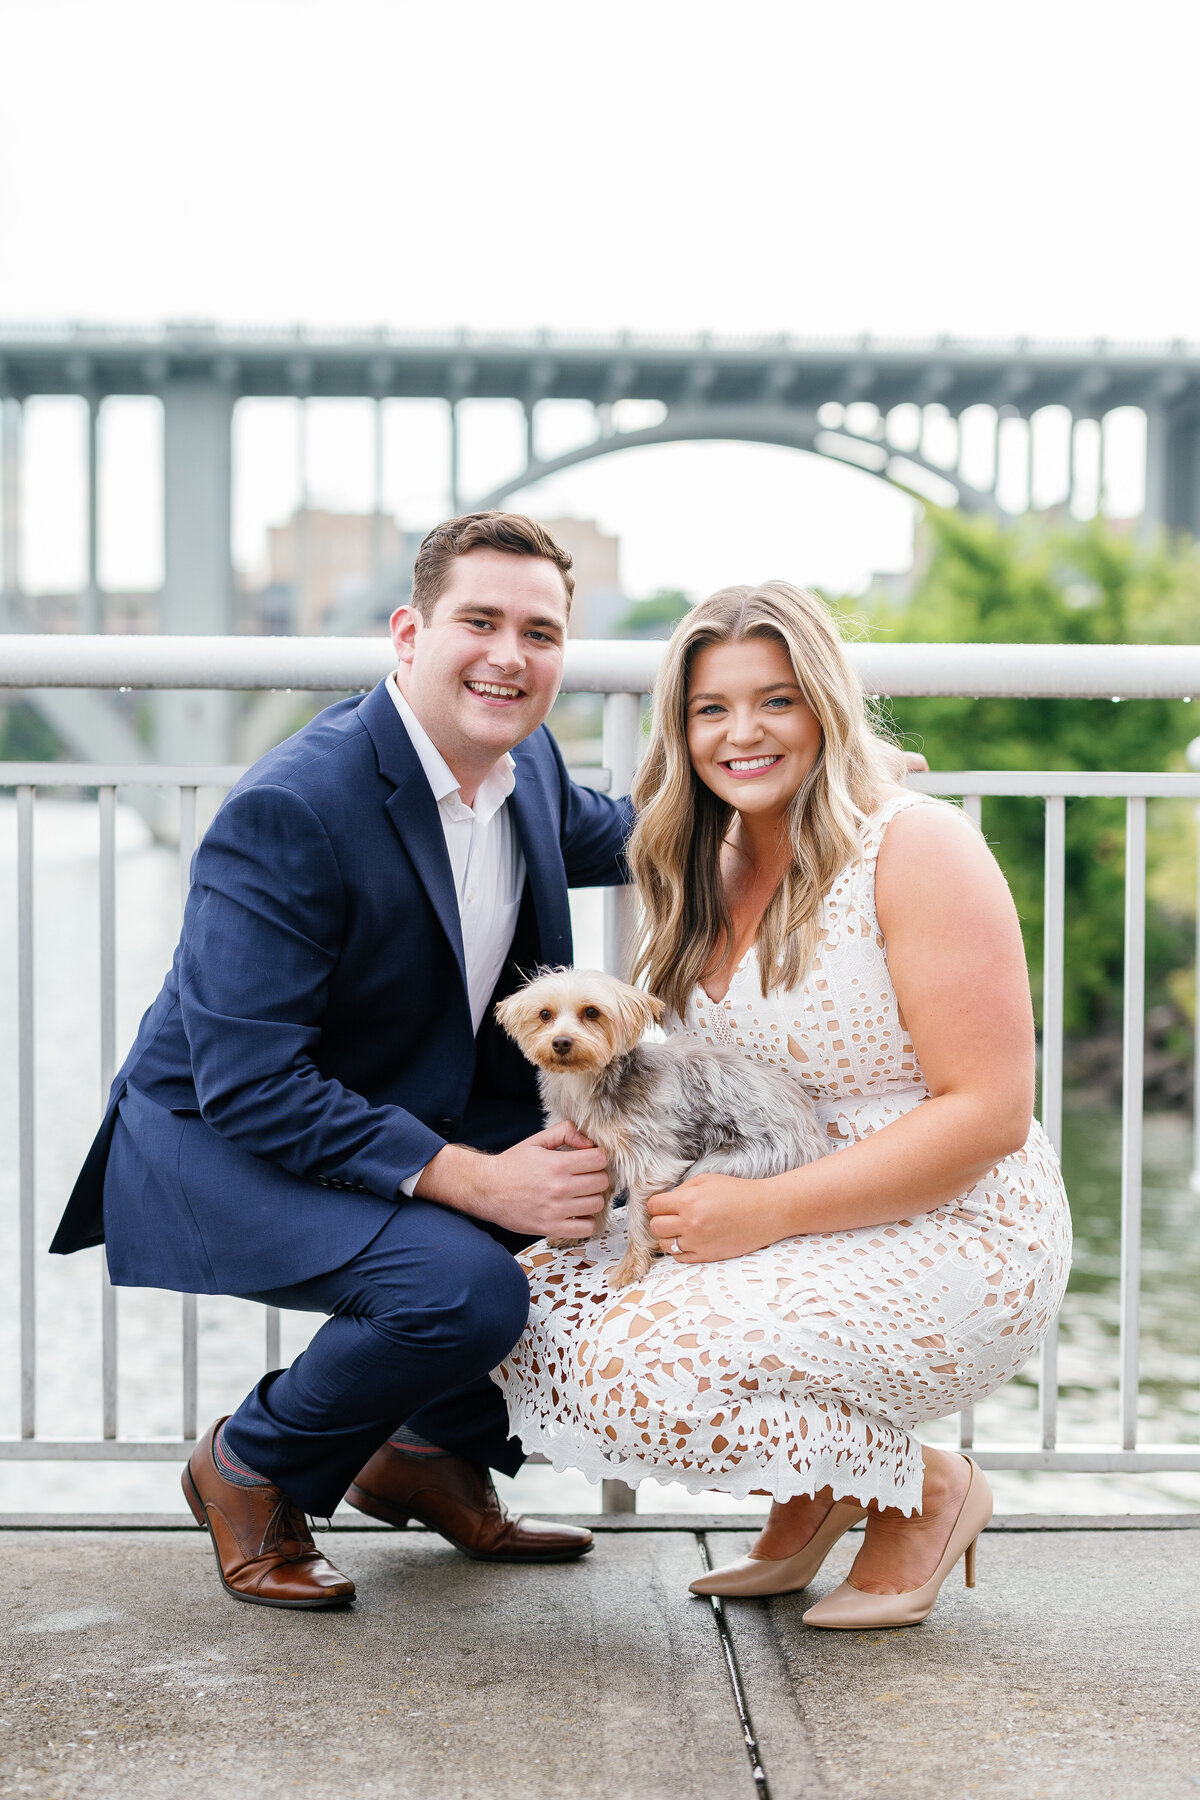 Paige and Tommy Engagement Sesison - Downtown Knoxville Tennessee - East Tennessee Wedding Photographer - Alaina René Photohgraphy-9